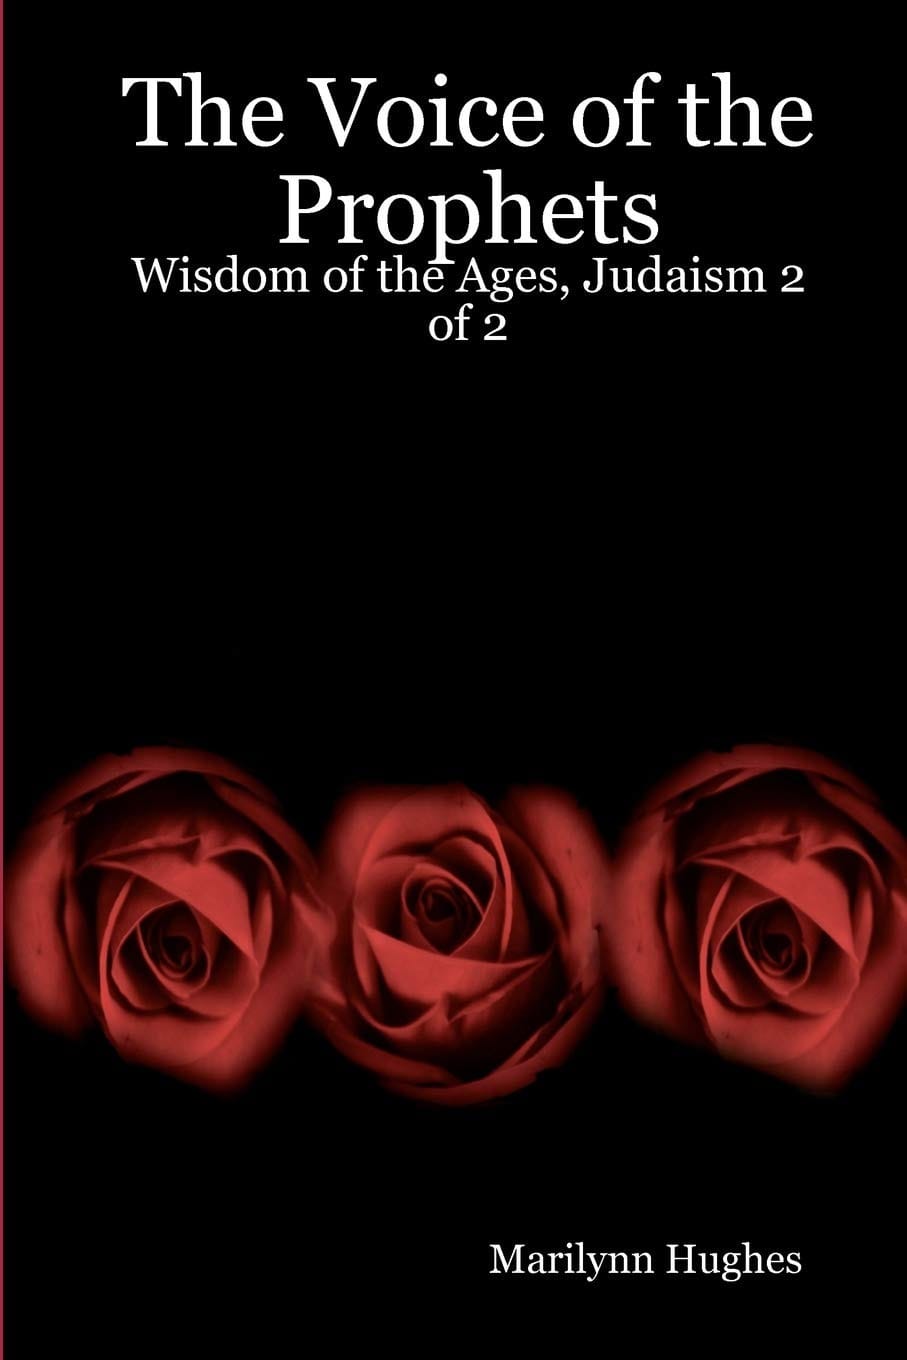 Wisdom of the Ages, Judaism 2 of 2, By Marilynn Hughes - An Encyclopedia of Ancient Sacred Texts in Twelve Volumes - An Out-of-Body Travel Book